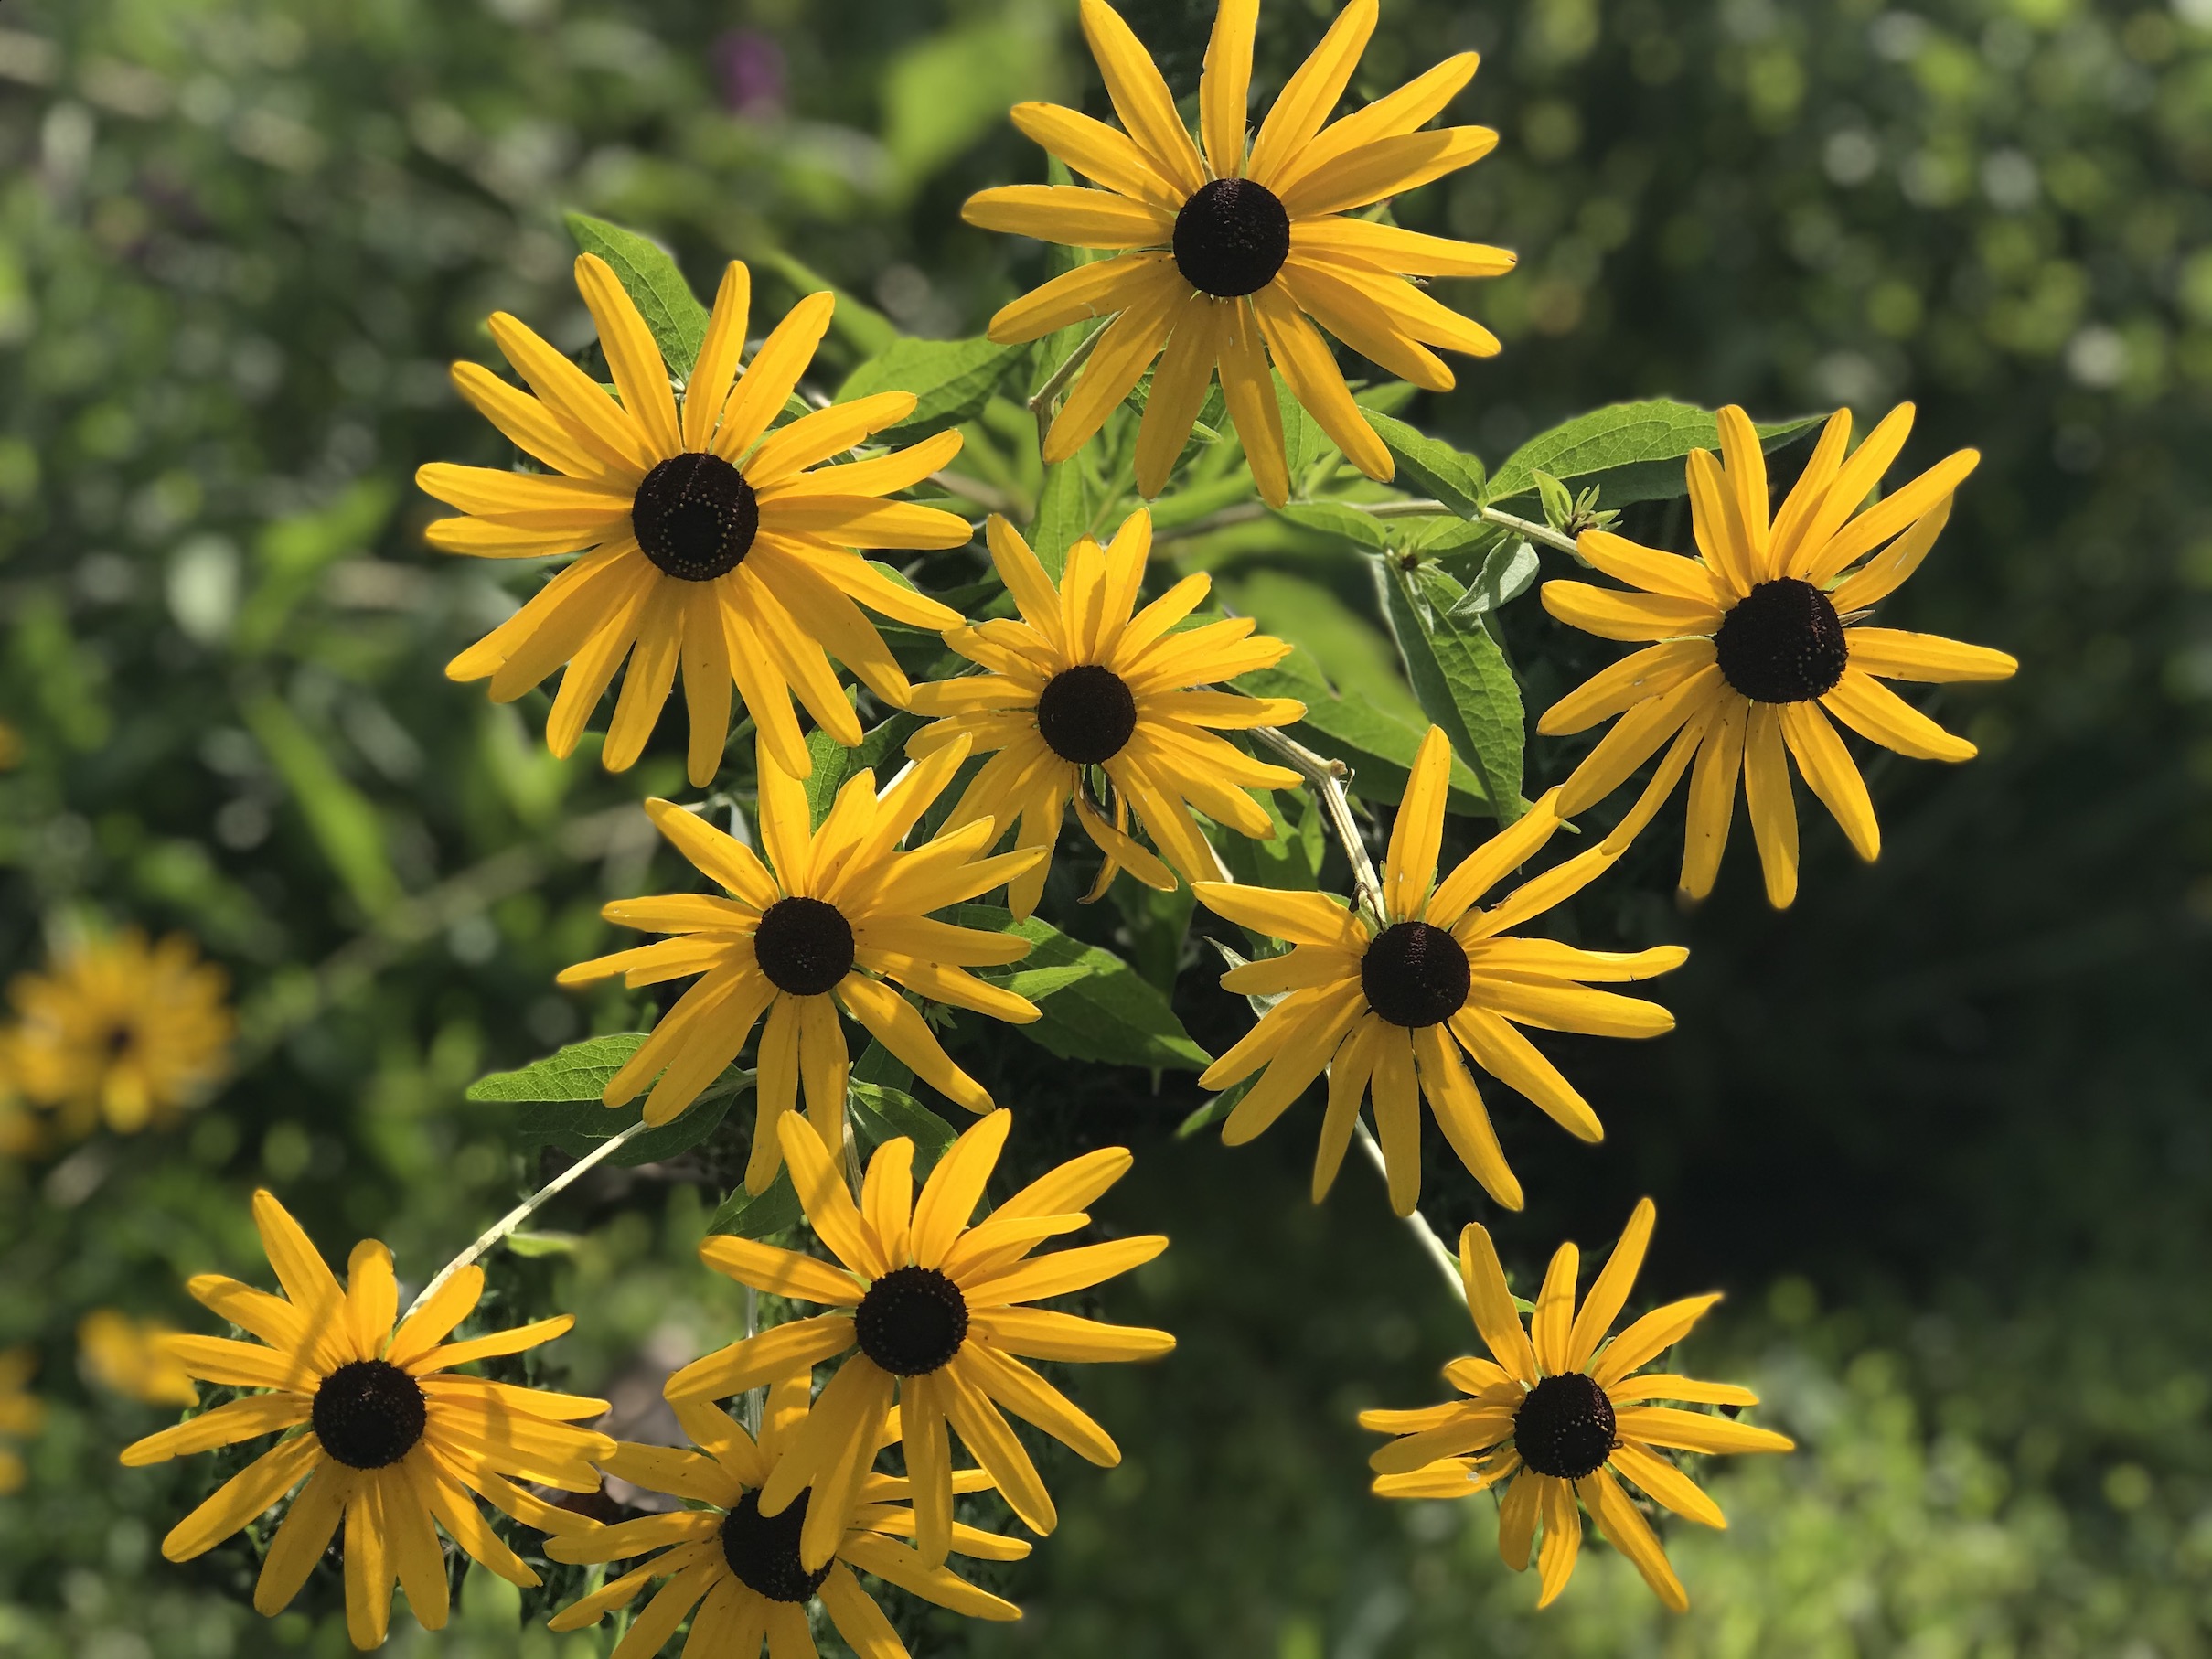 Beautiful Black-Eyed Susan Yellow Flowers at Ansted Park in Temperance, MI